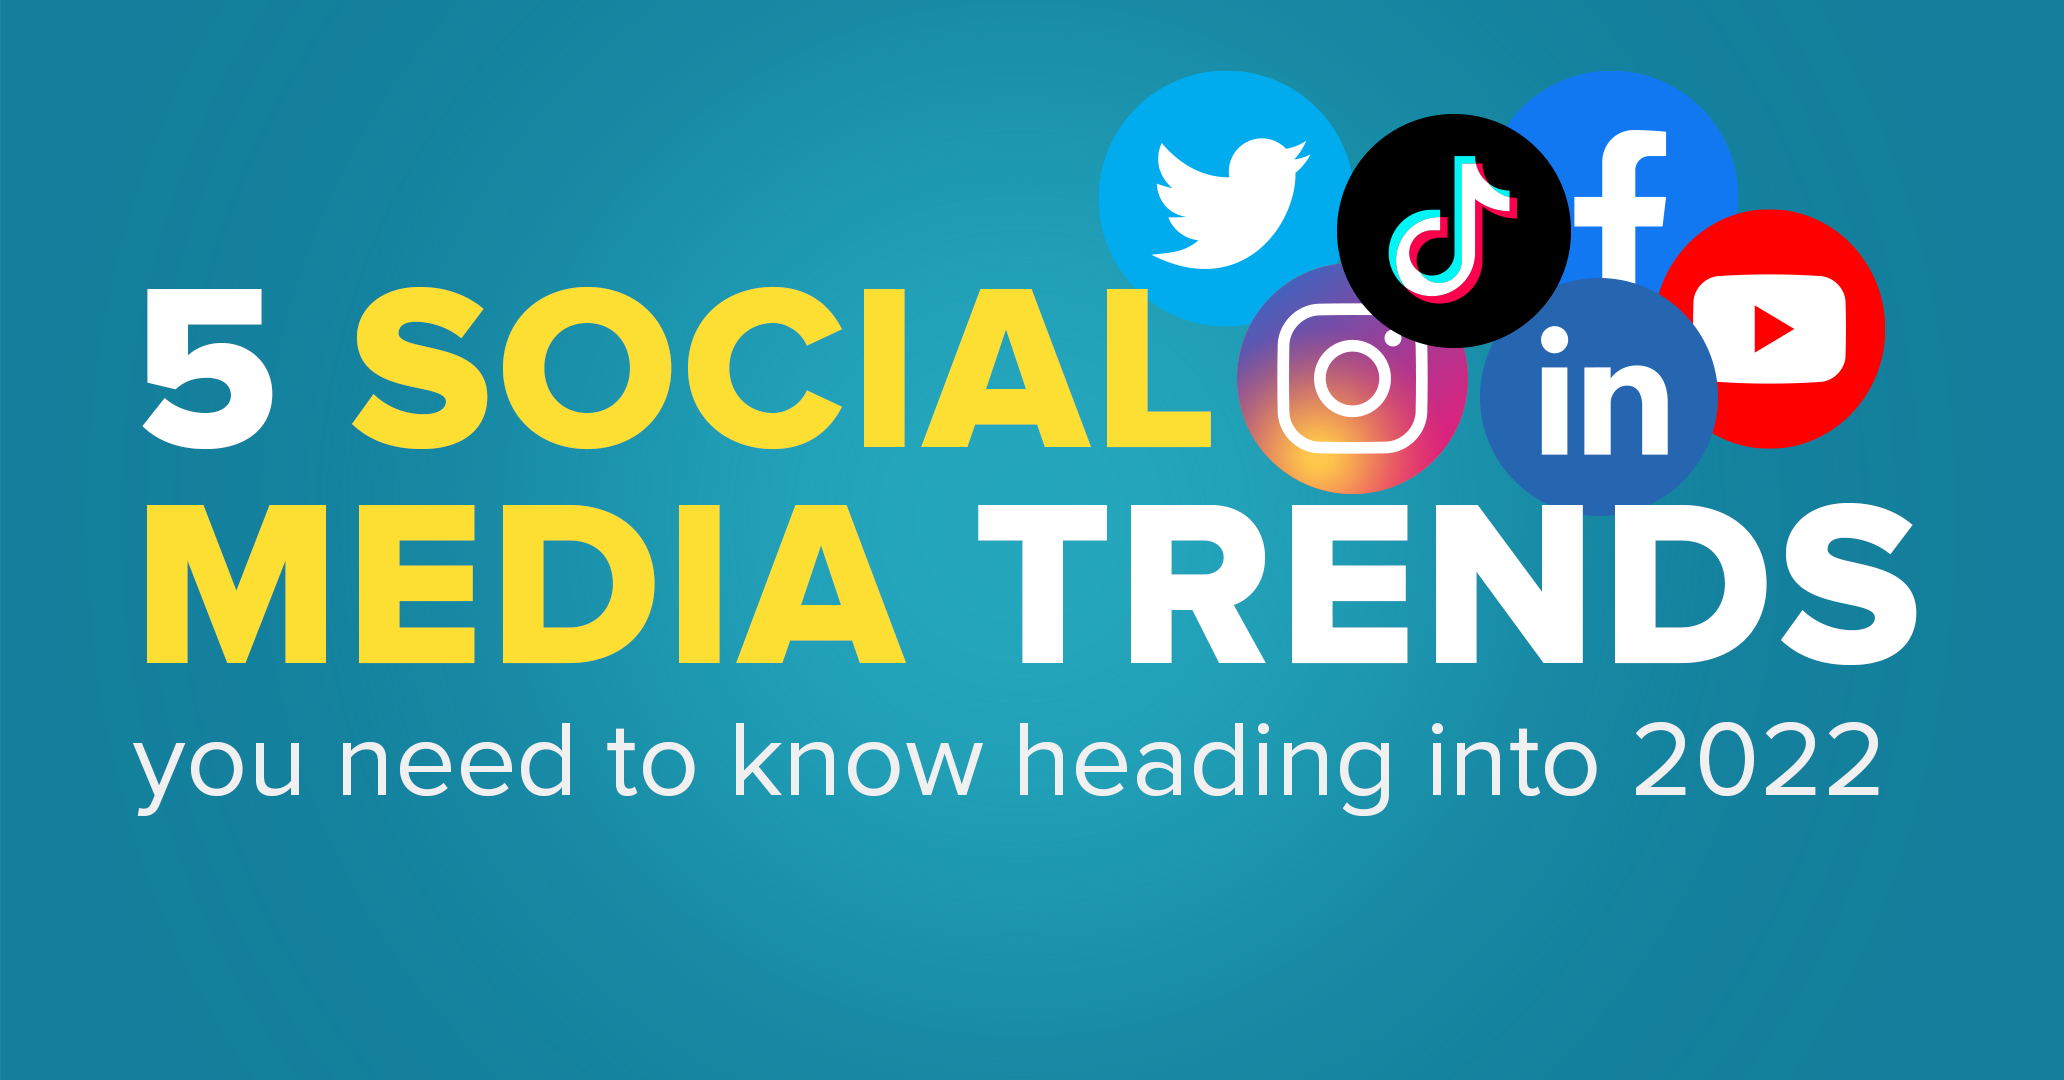 5 social media trends you need to know heading into 2022